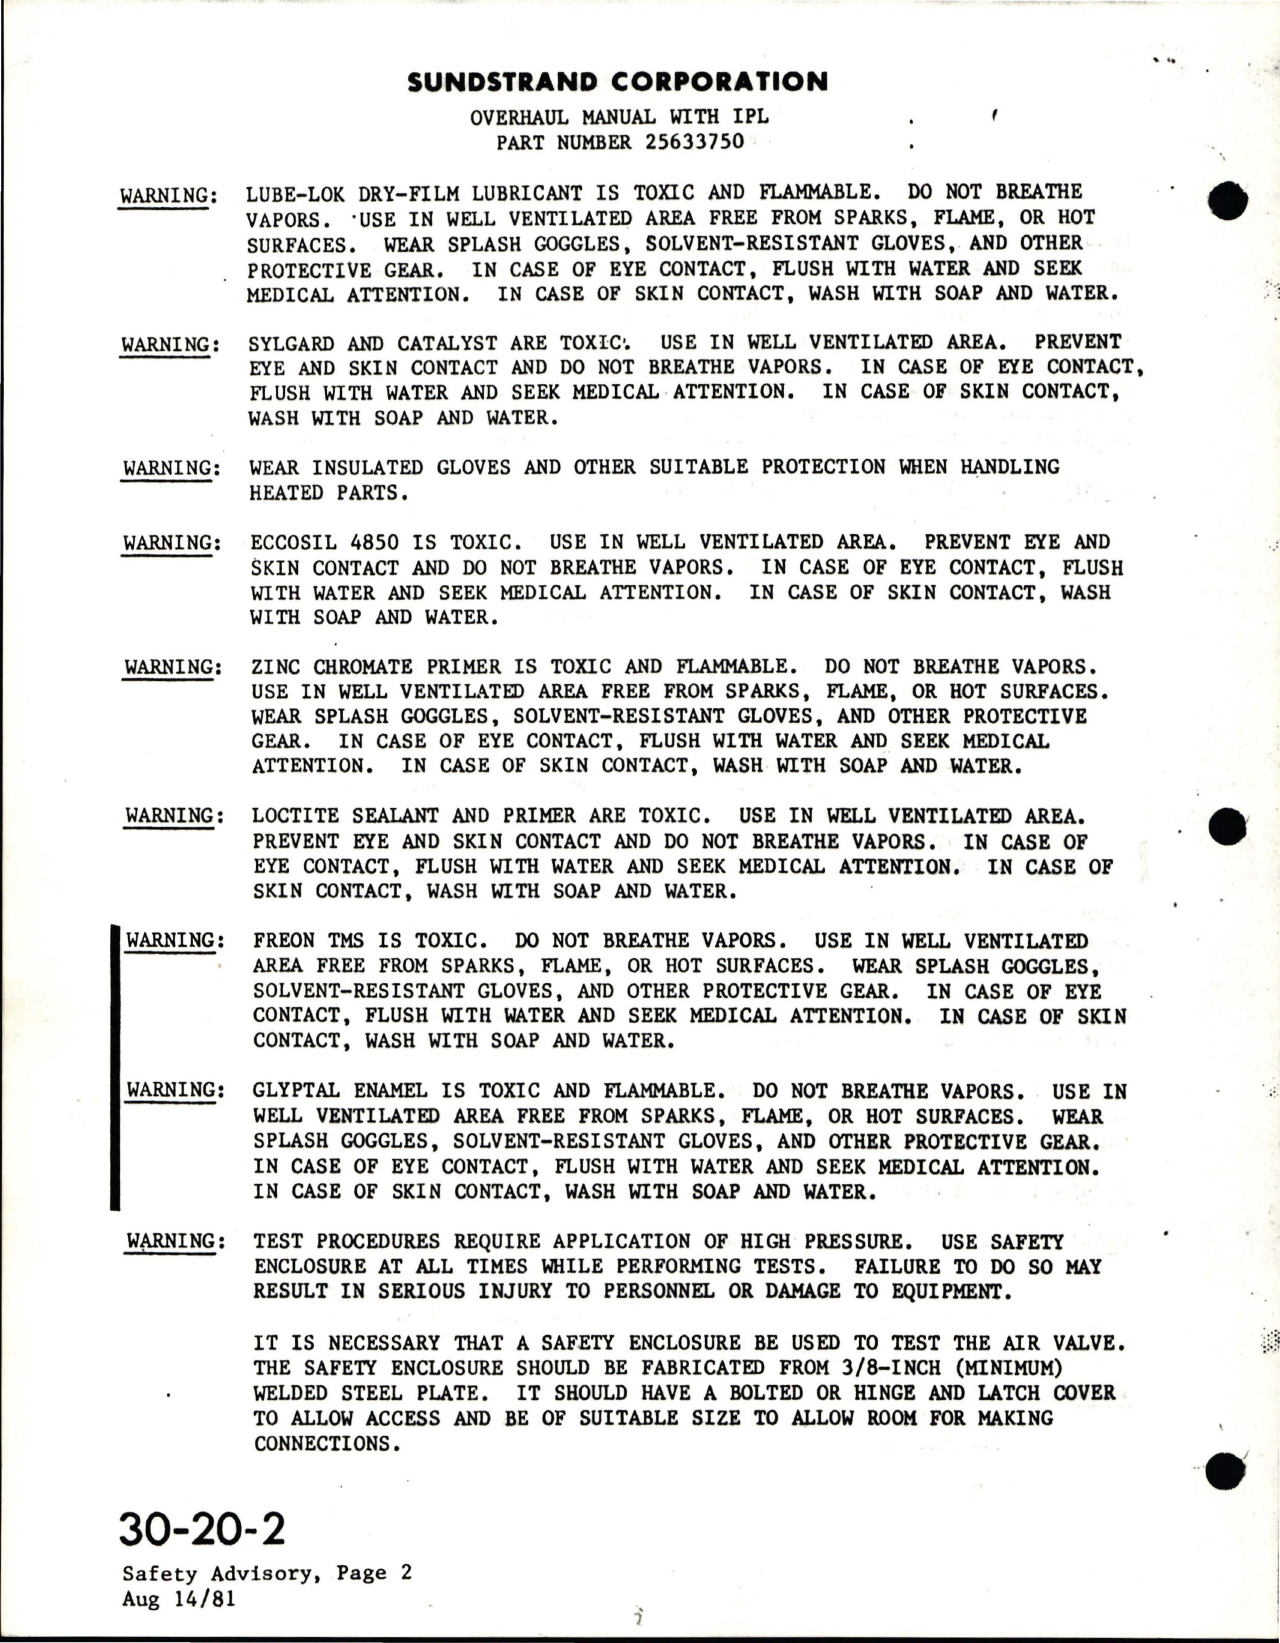 Sample page 5 from AirCorps Library document: Overhaul Manual for Air Valve